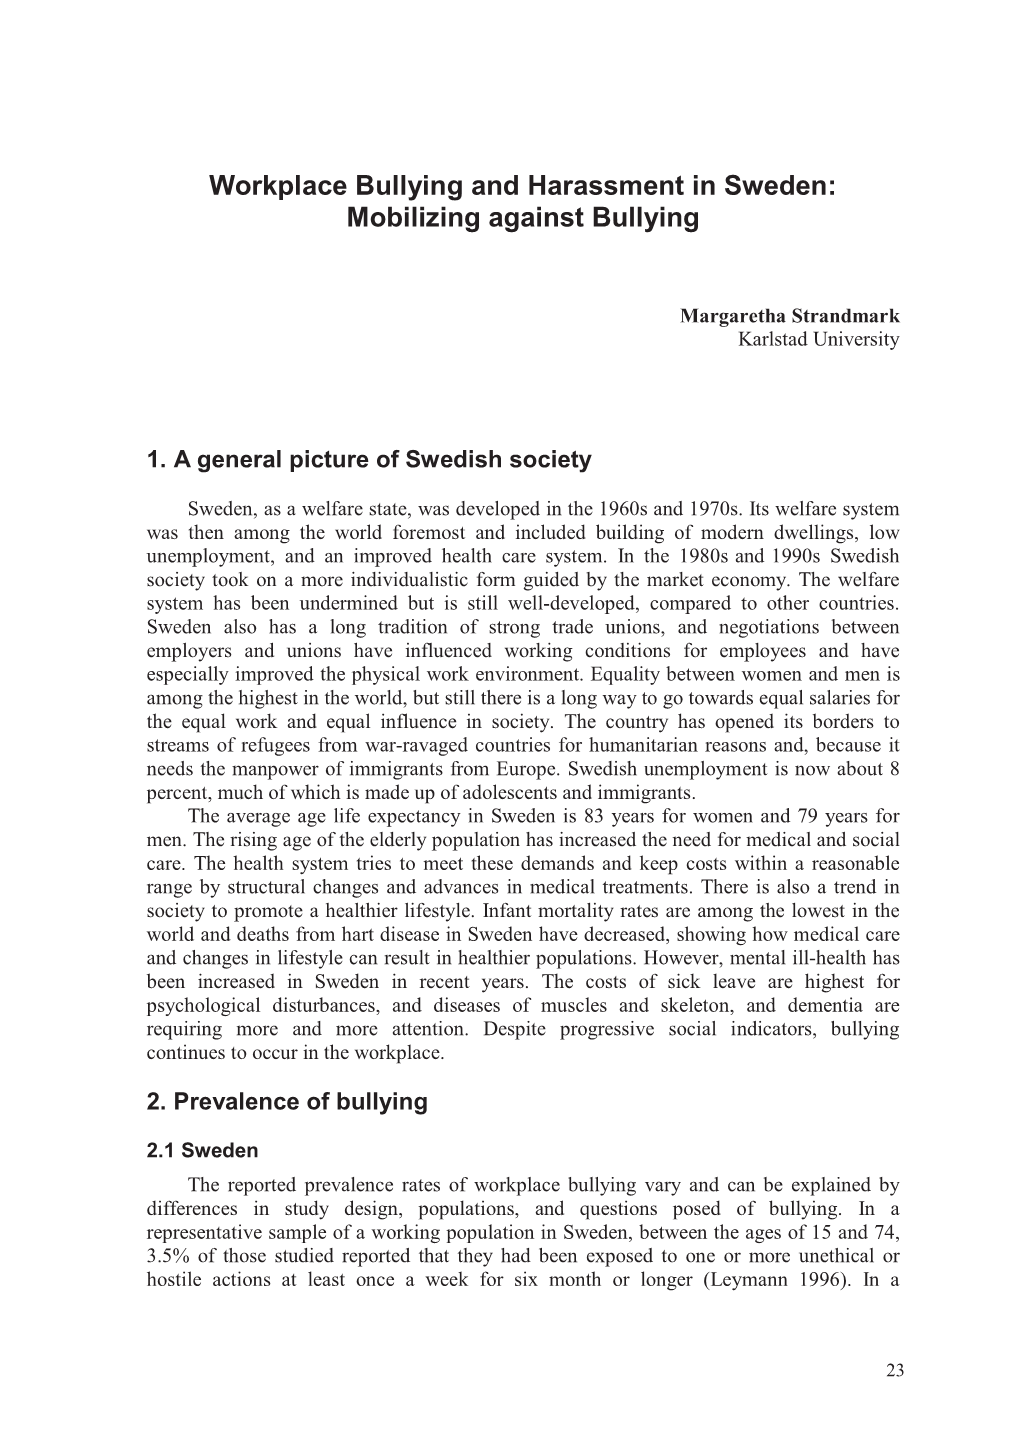 Workplace Bullying and Harassment in Sweden: Mobilizing Against Bullying